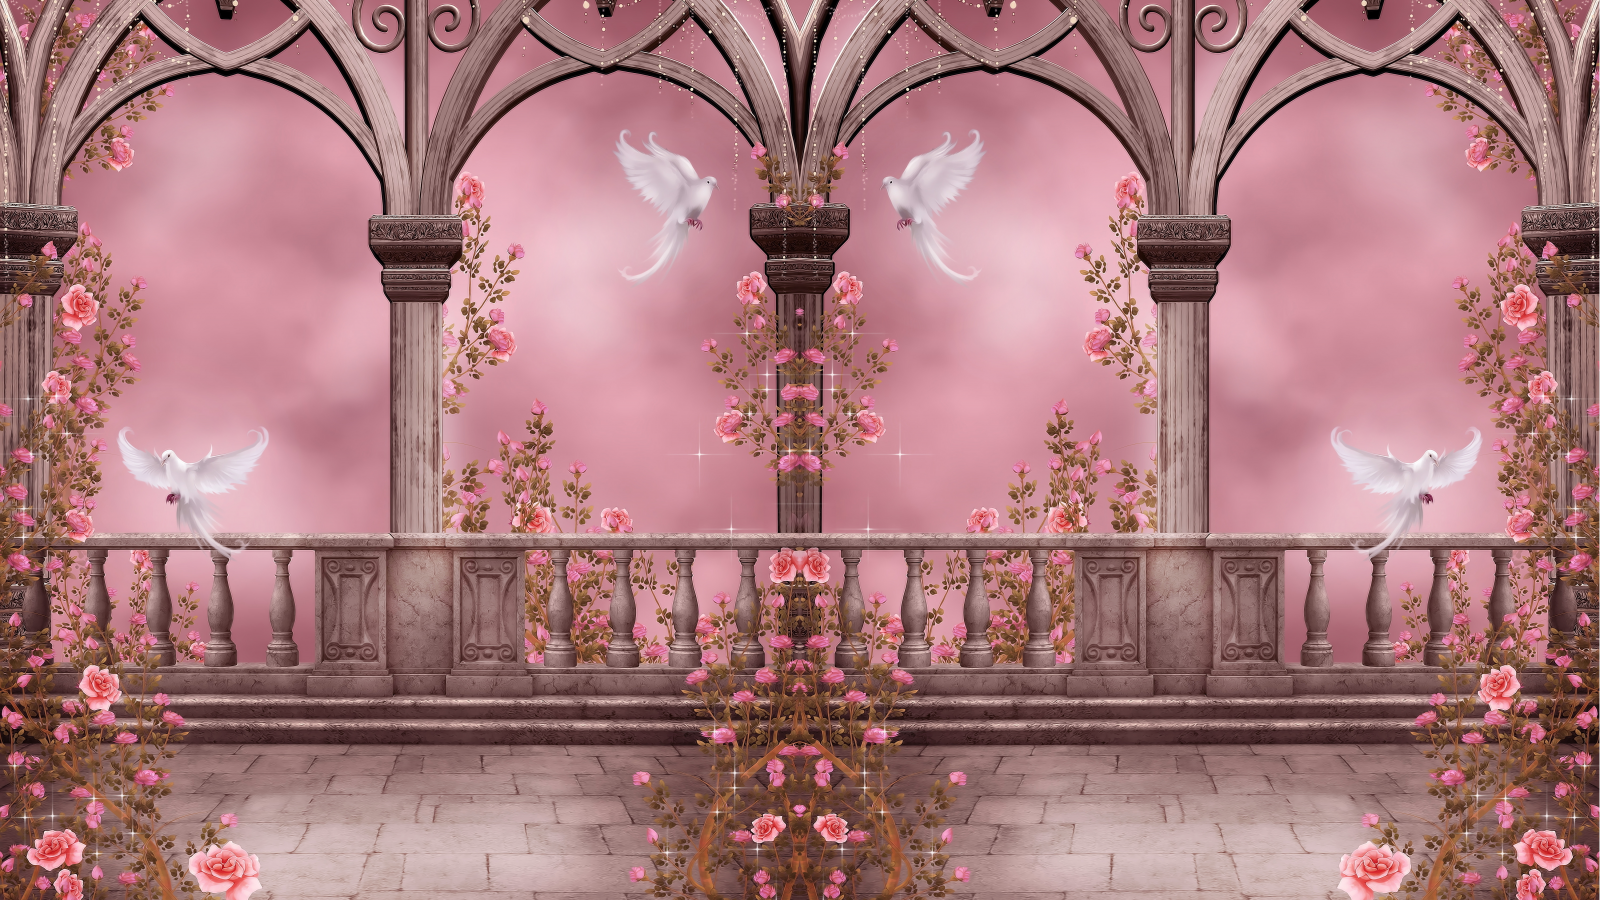 pigeons, rose garden, flowers, розовый сад, arches, garlands, columns, roses, doves